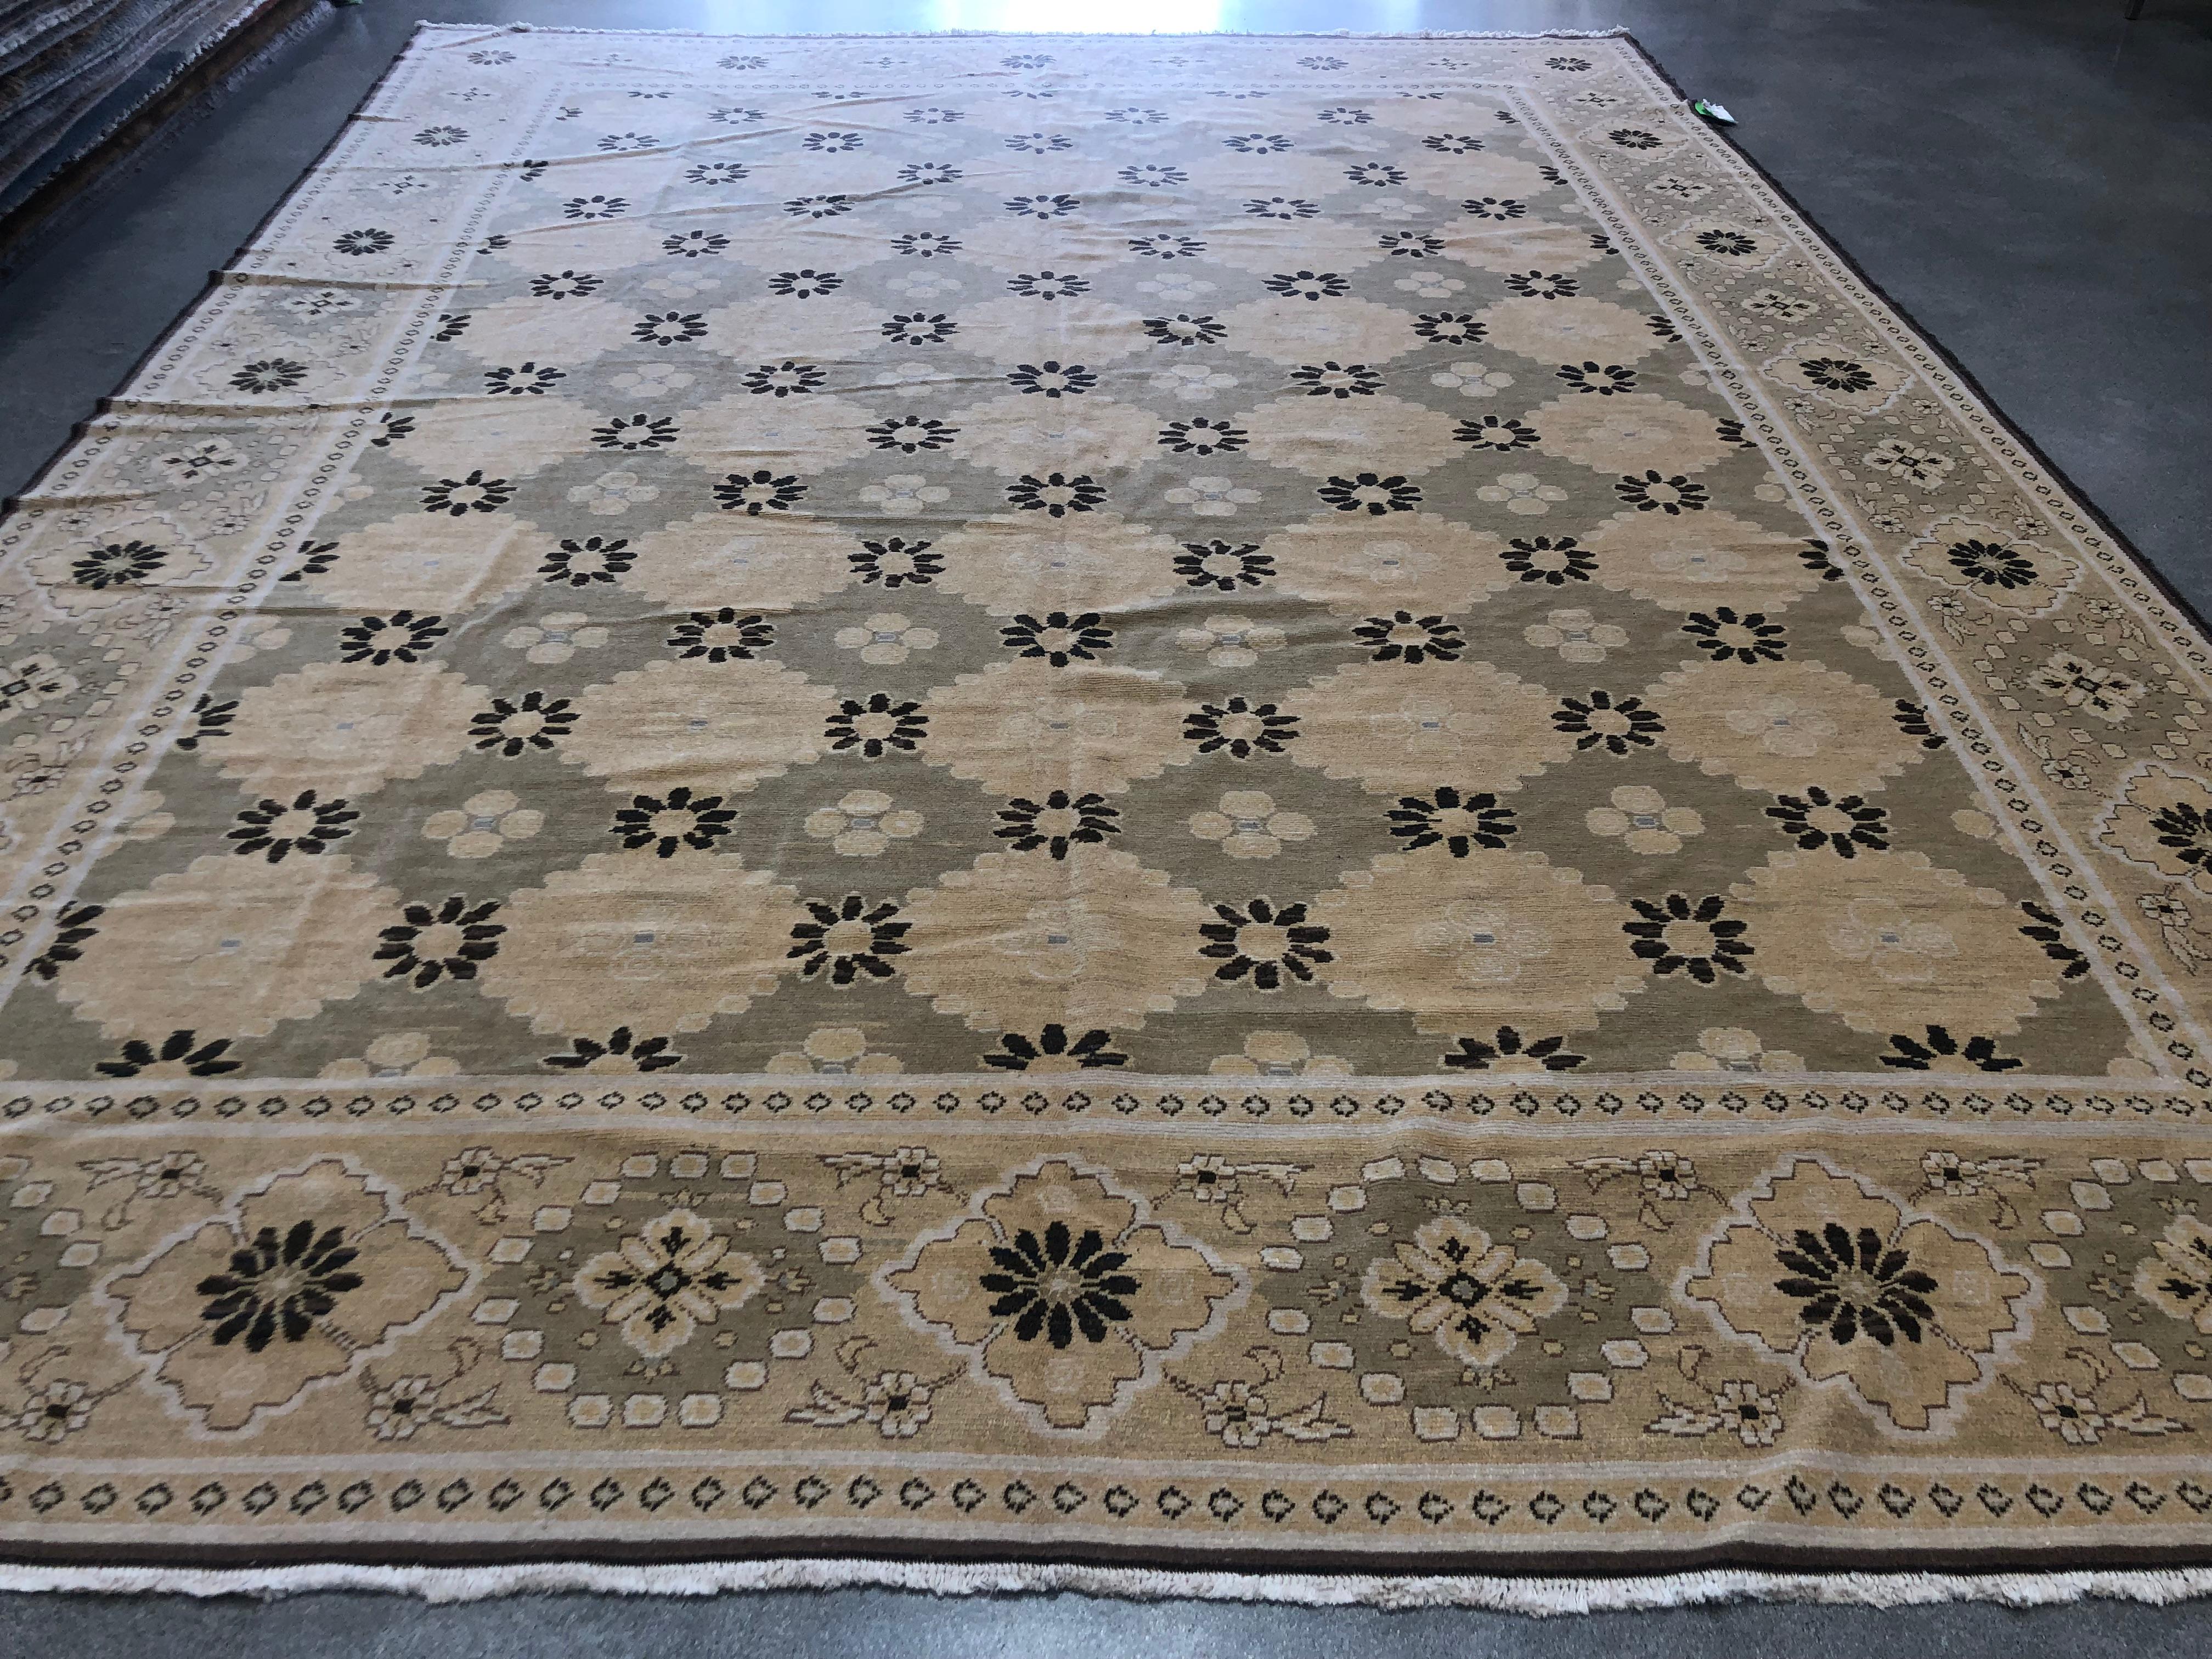 Traditional styling meets modern floral motifs in this European Design collection rug. Light golden beige, taupe and dark brown/black create contrasts that make the floral motifs of the large center panel and wide border frame stand out. An engaging